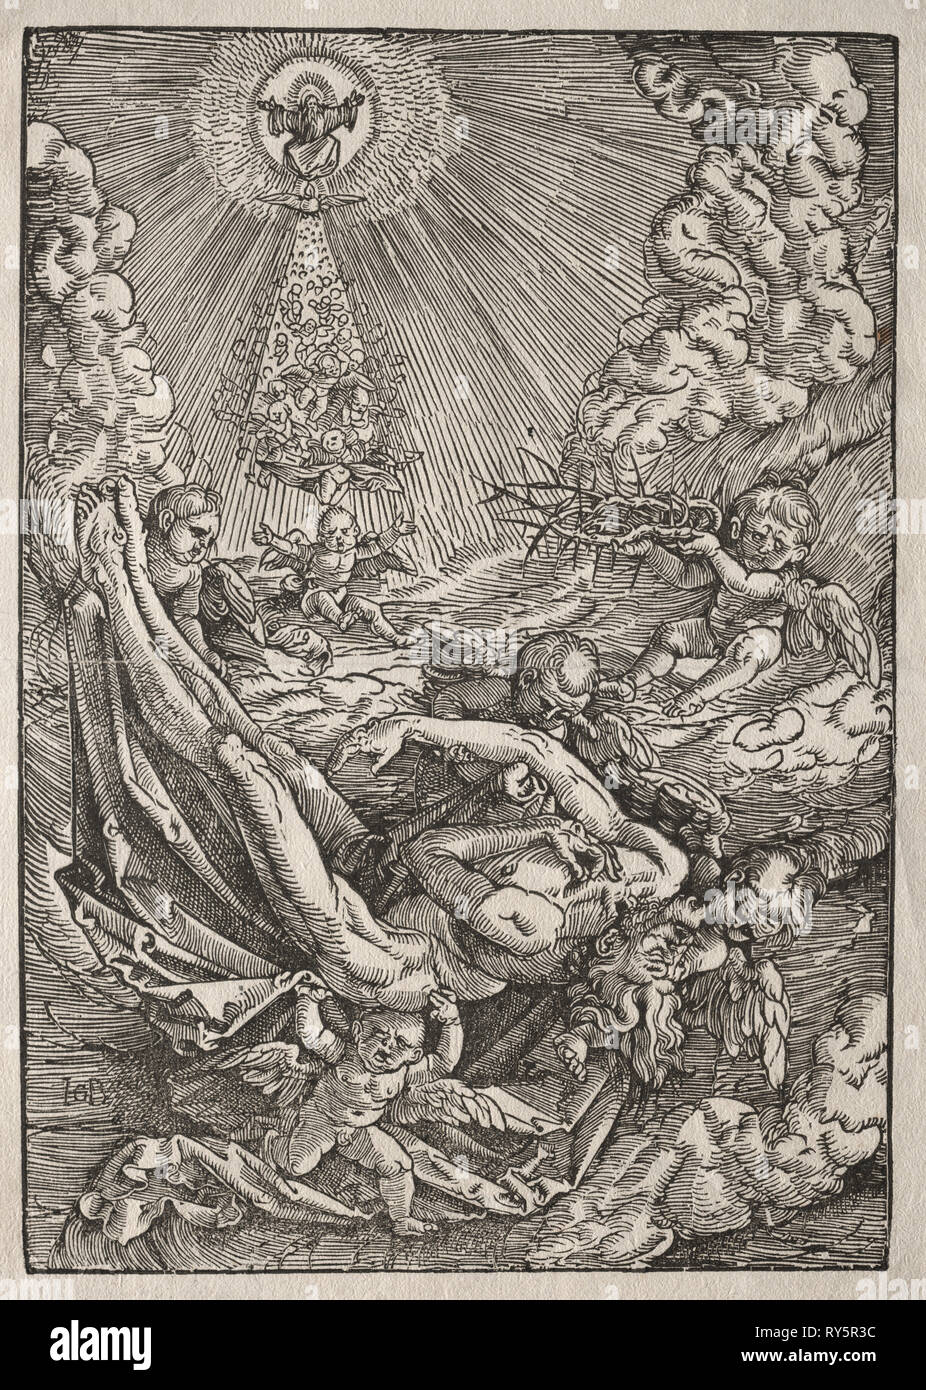 Christ Carried to Heaven by Angels, c. 1515-1517. Hans Baldung (German, 1484/85-1545). Woodcut Stock Photo